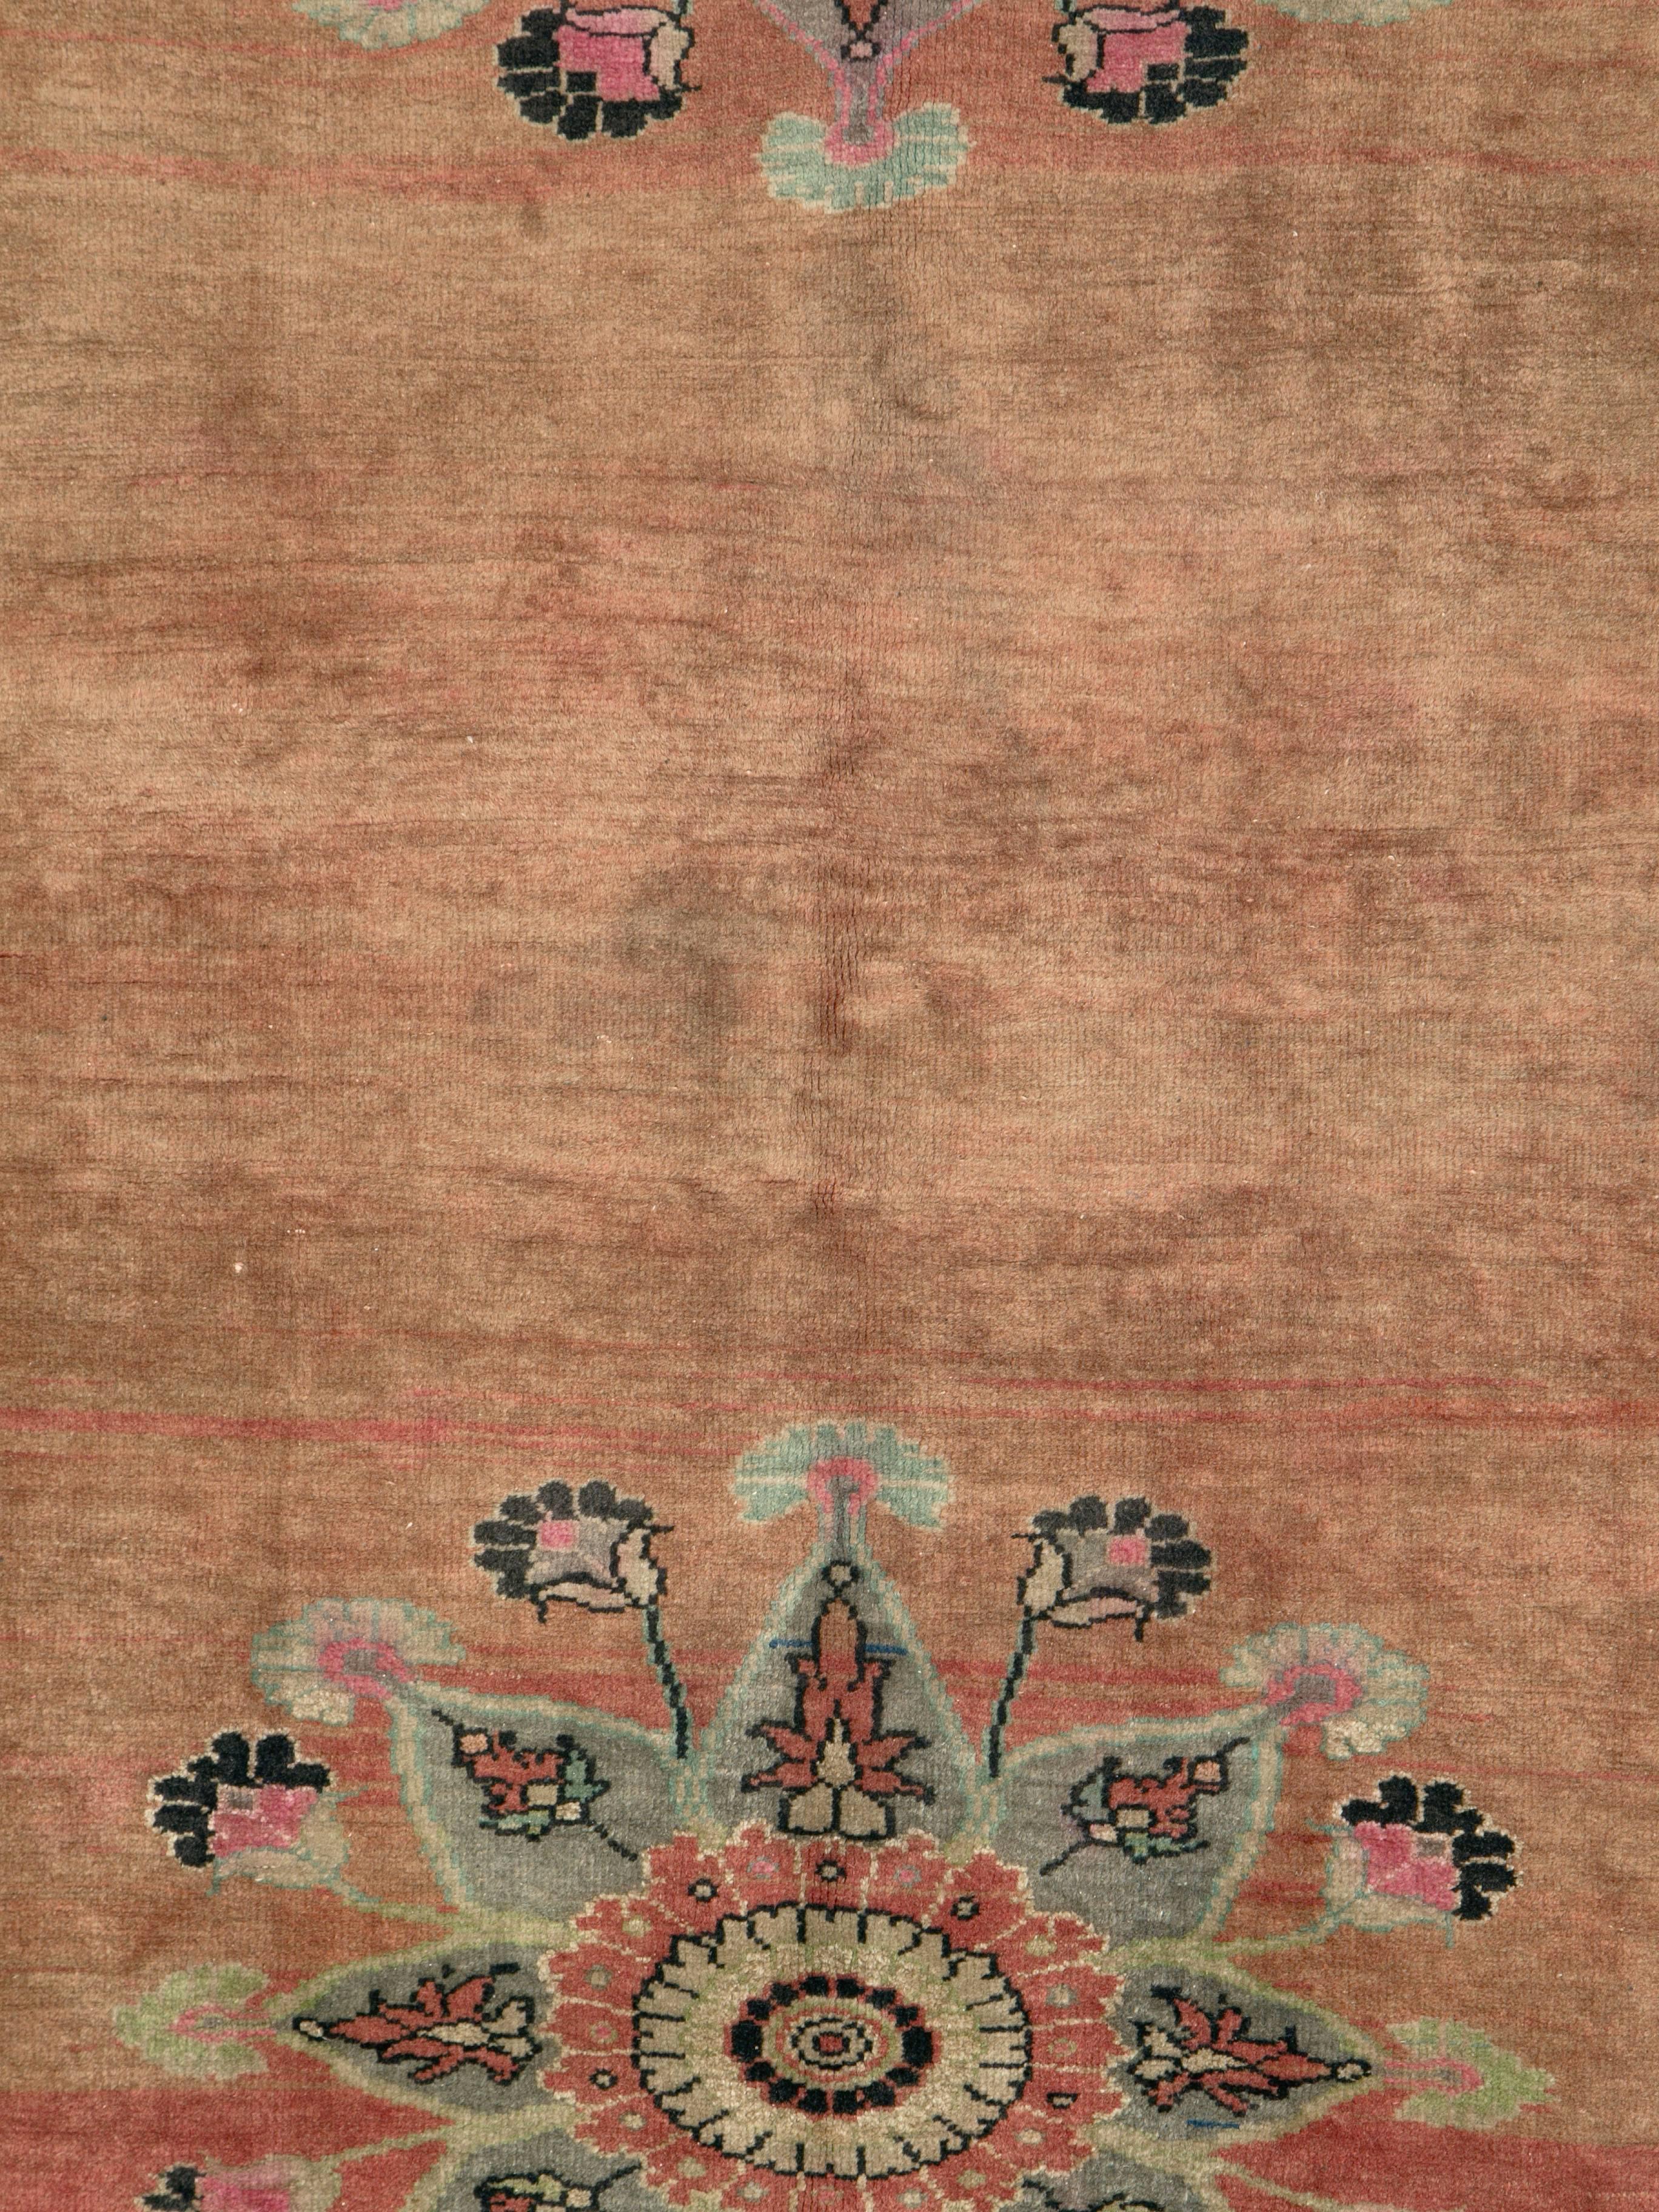 A Deco-inspired vintage Indian rug from the mid-20th century.